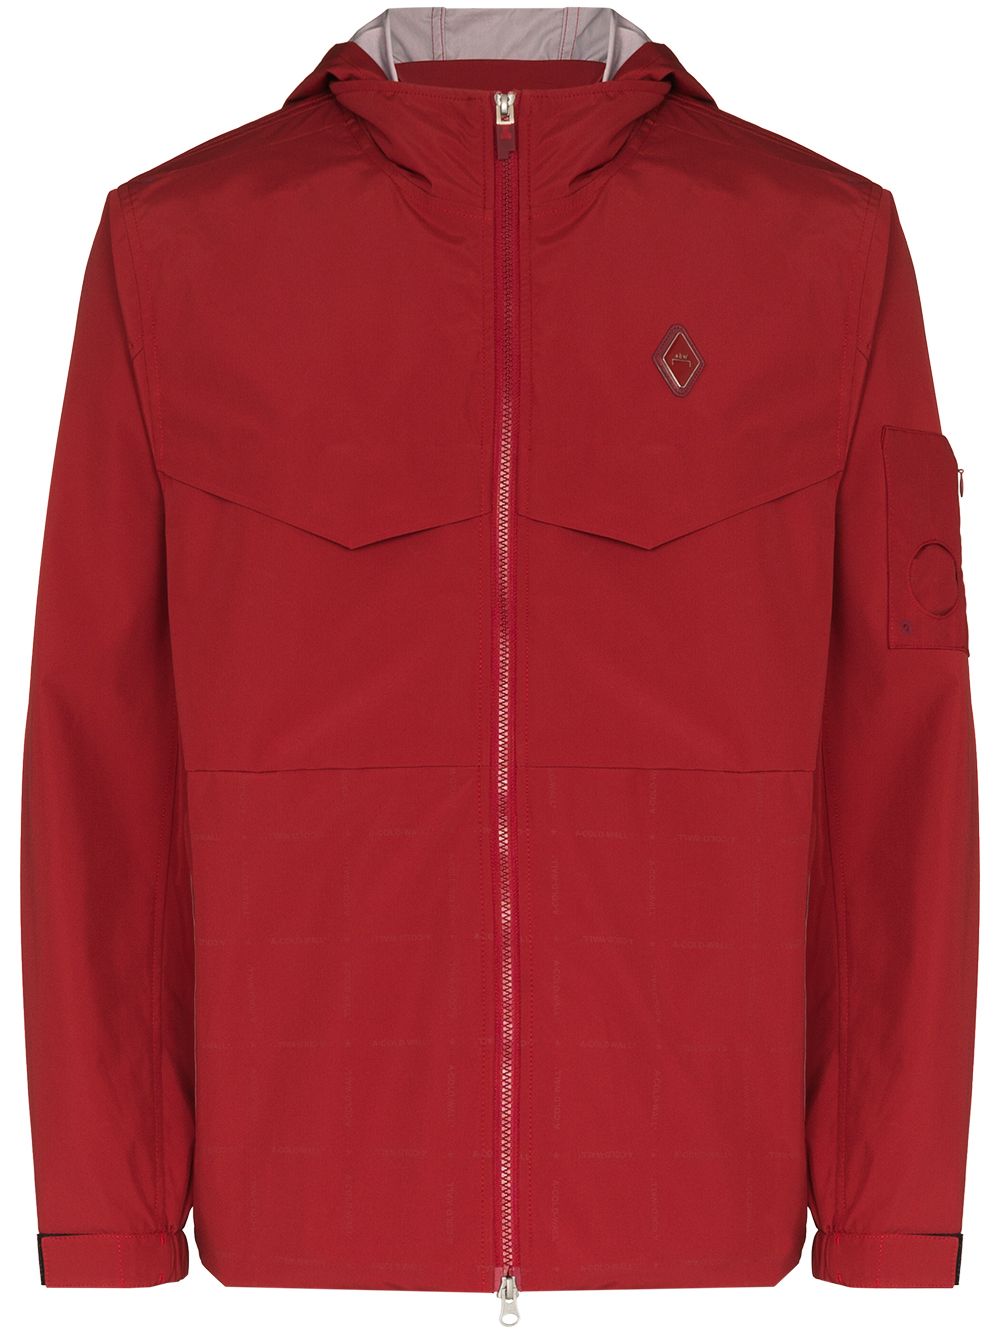 A-COLD-WALL* Essentials storm jacket - Red von A-COLD-WALL*